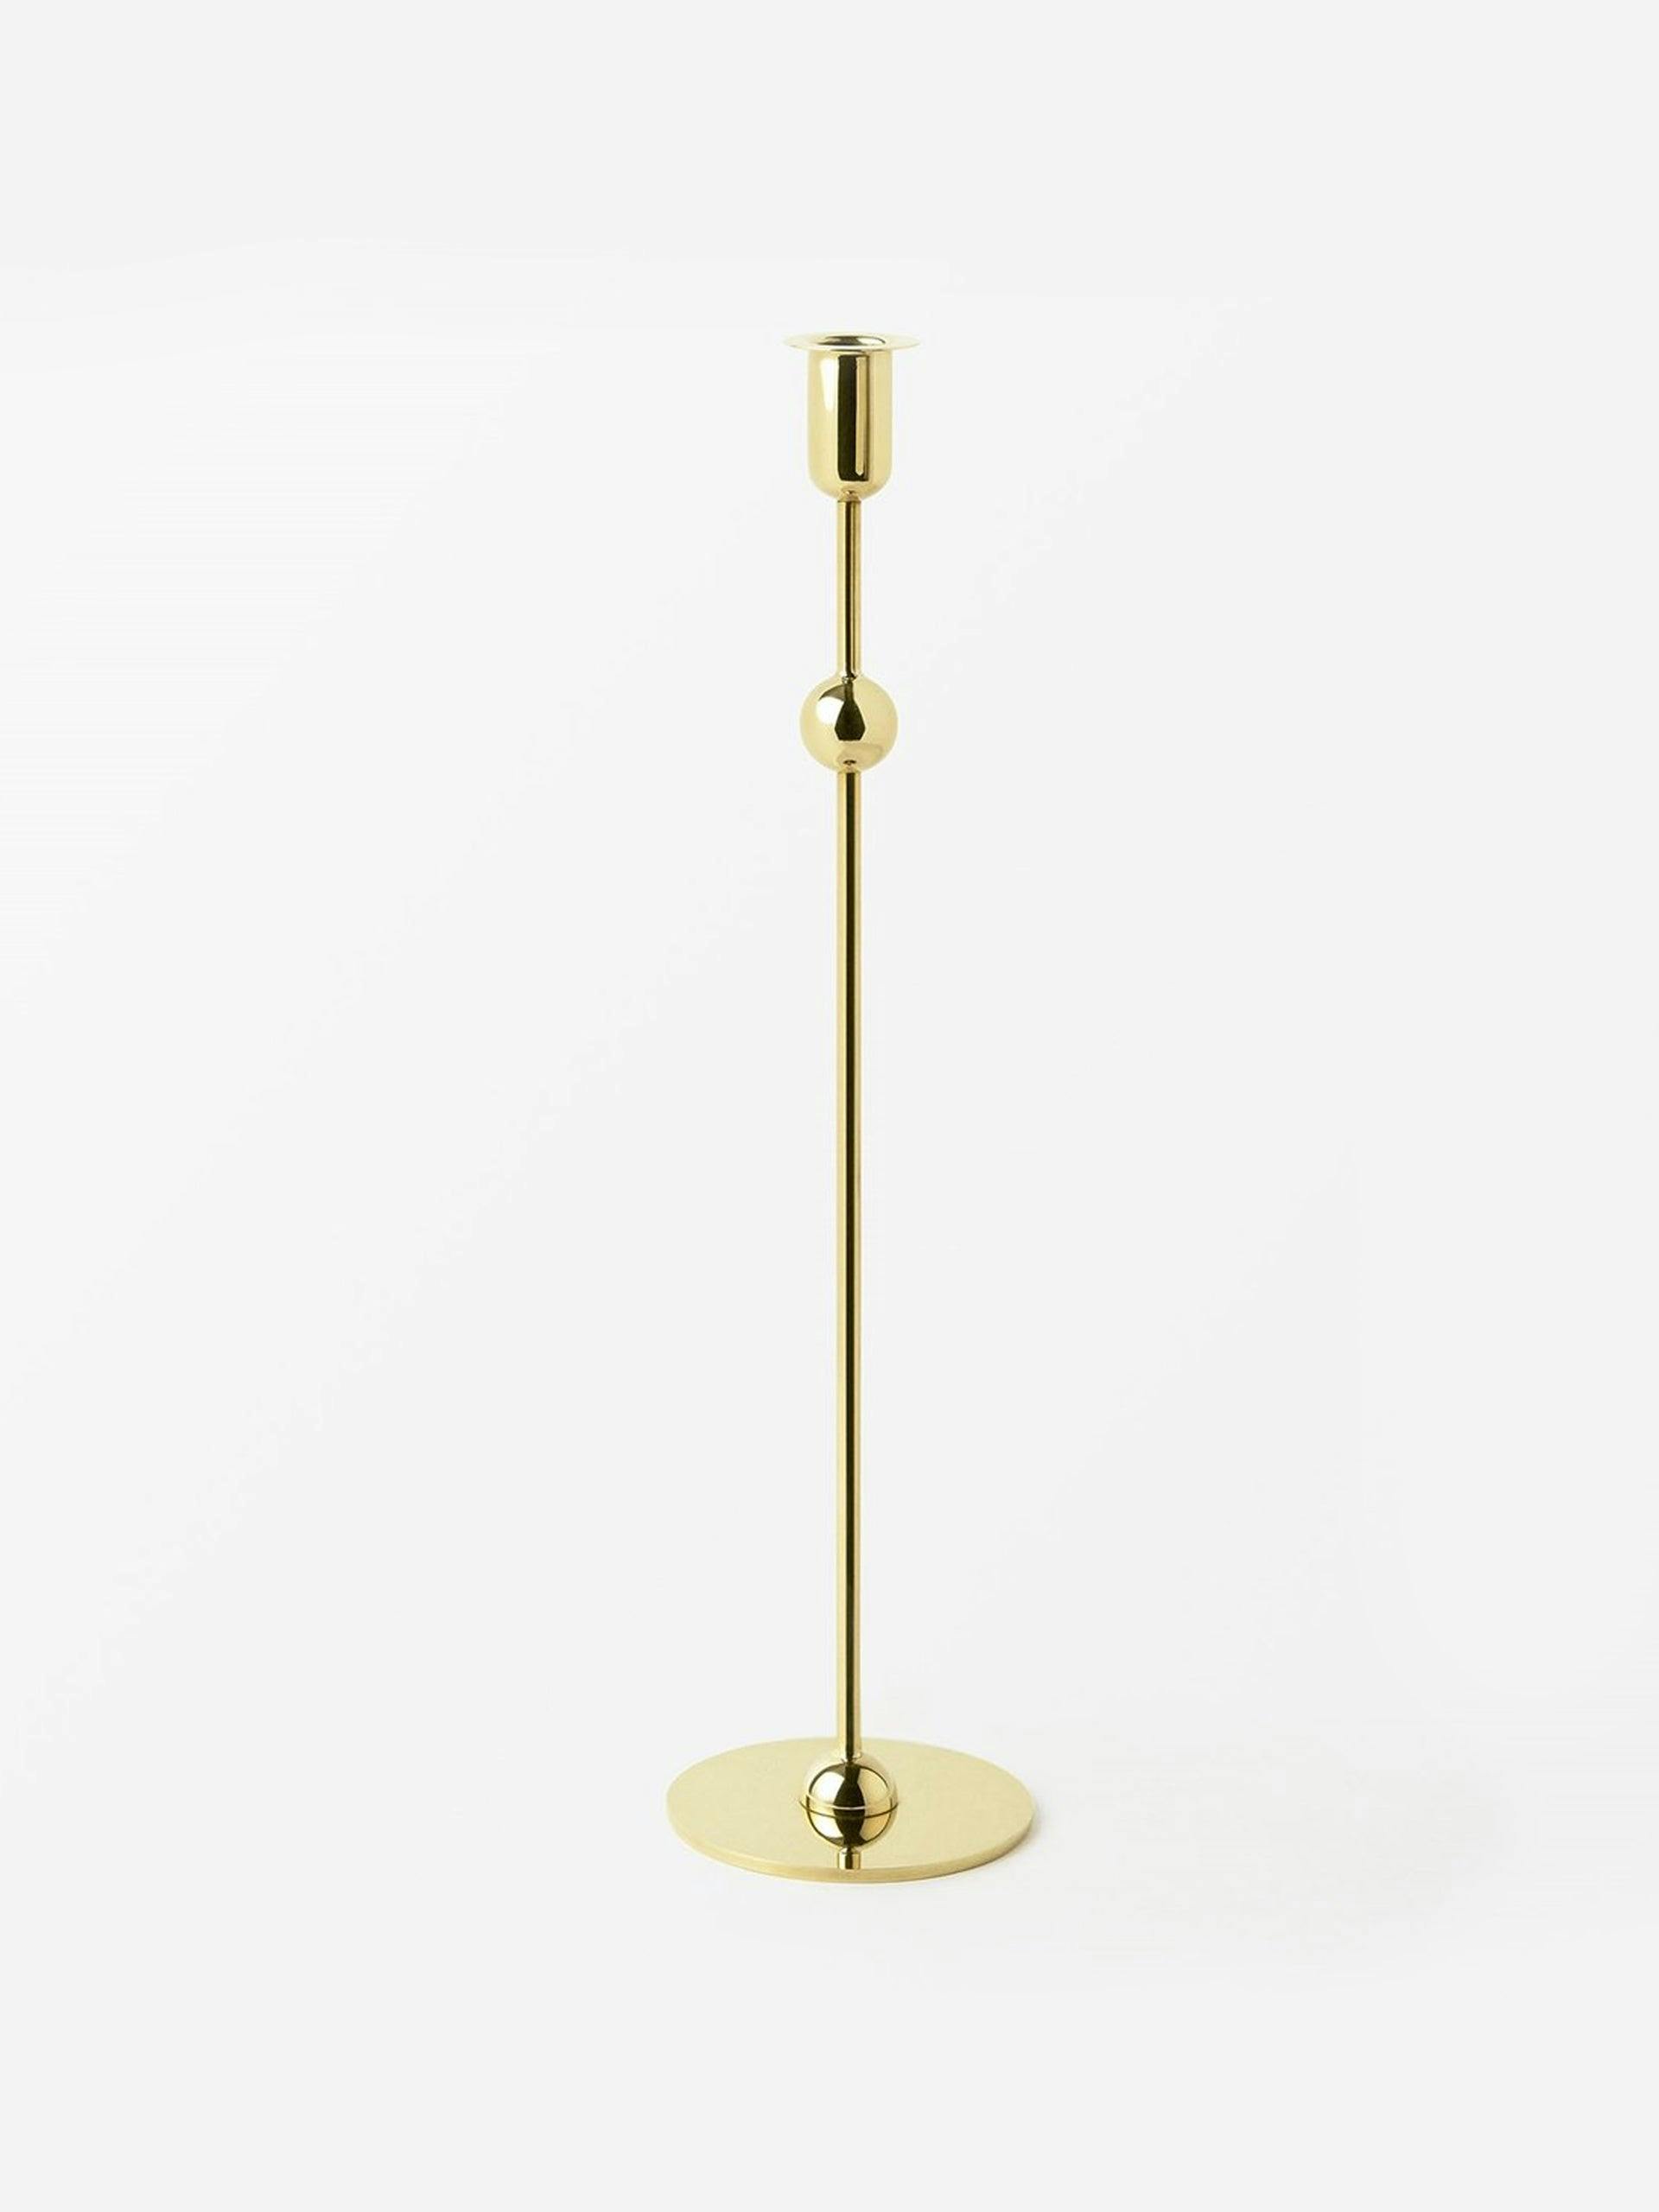 Brass candle holder